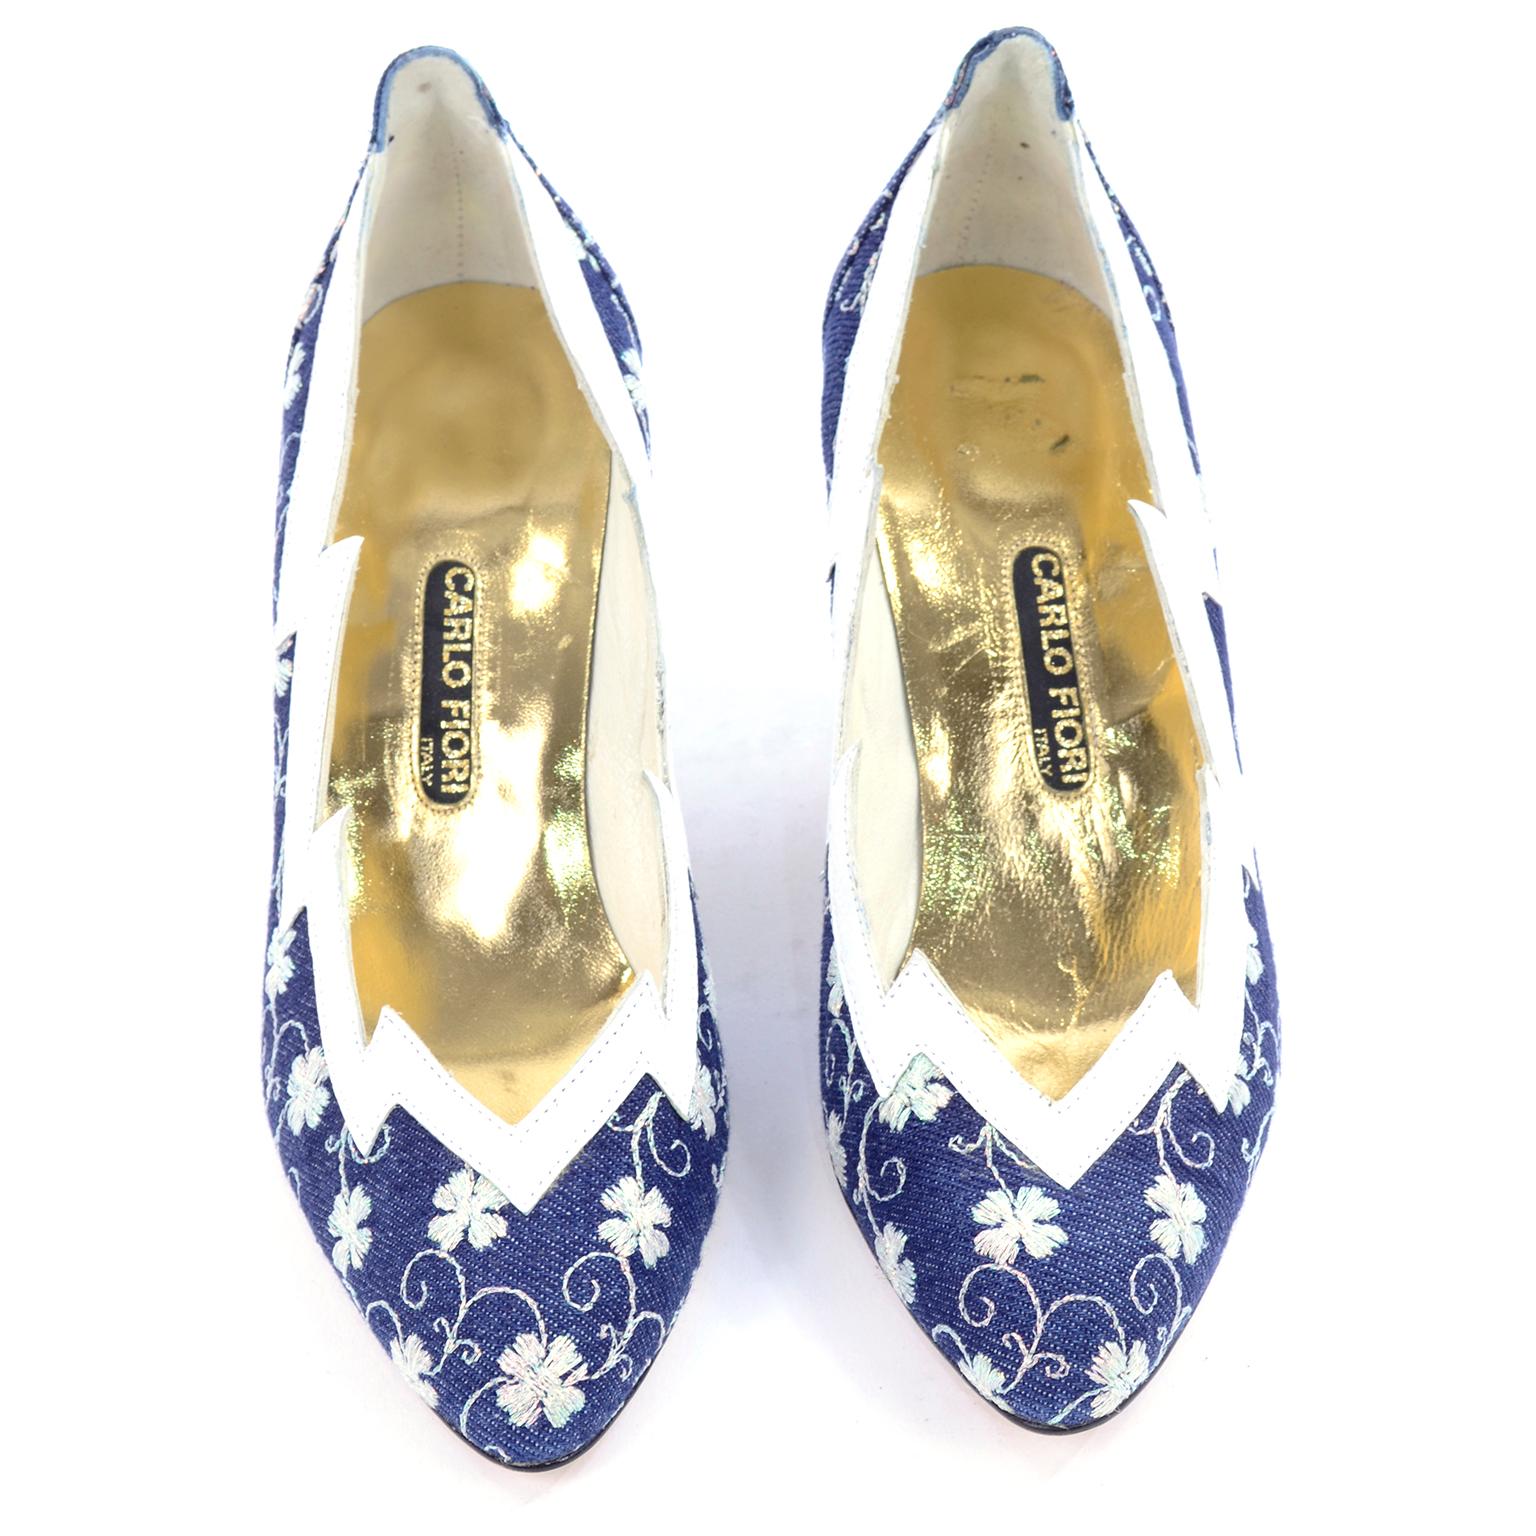 These are deadstock, unworn Carlo Fiori Italy denim blue and white embroidered heels. The shoes have zigzag edged white leather uppers and the denim blue fabric is stitched with white iridescent flourishes and four leaf clovers!  Made in Spain with